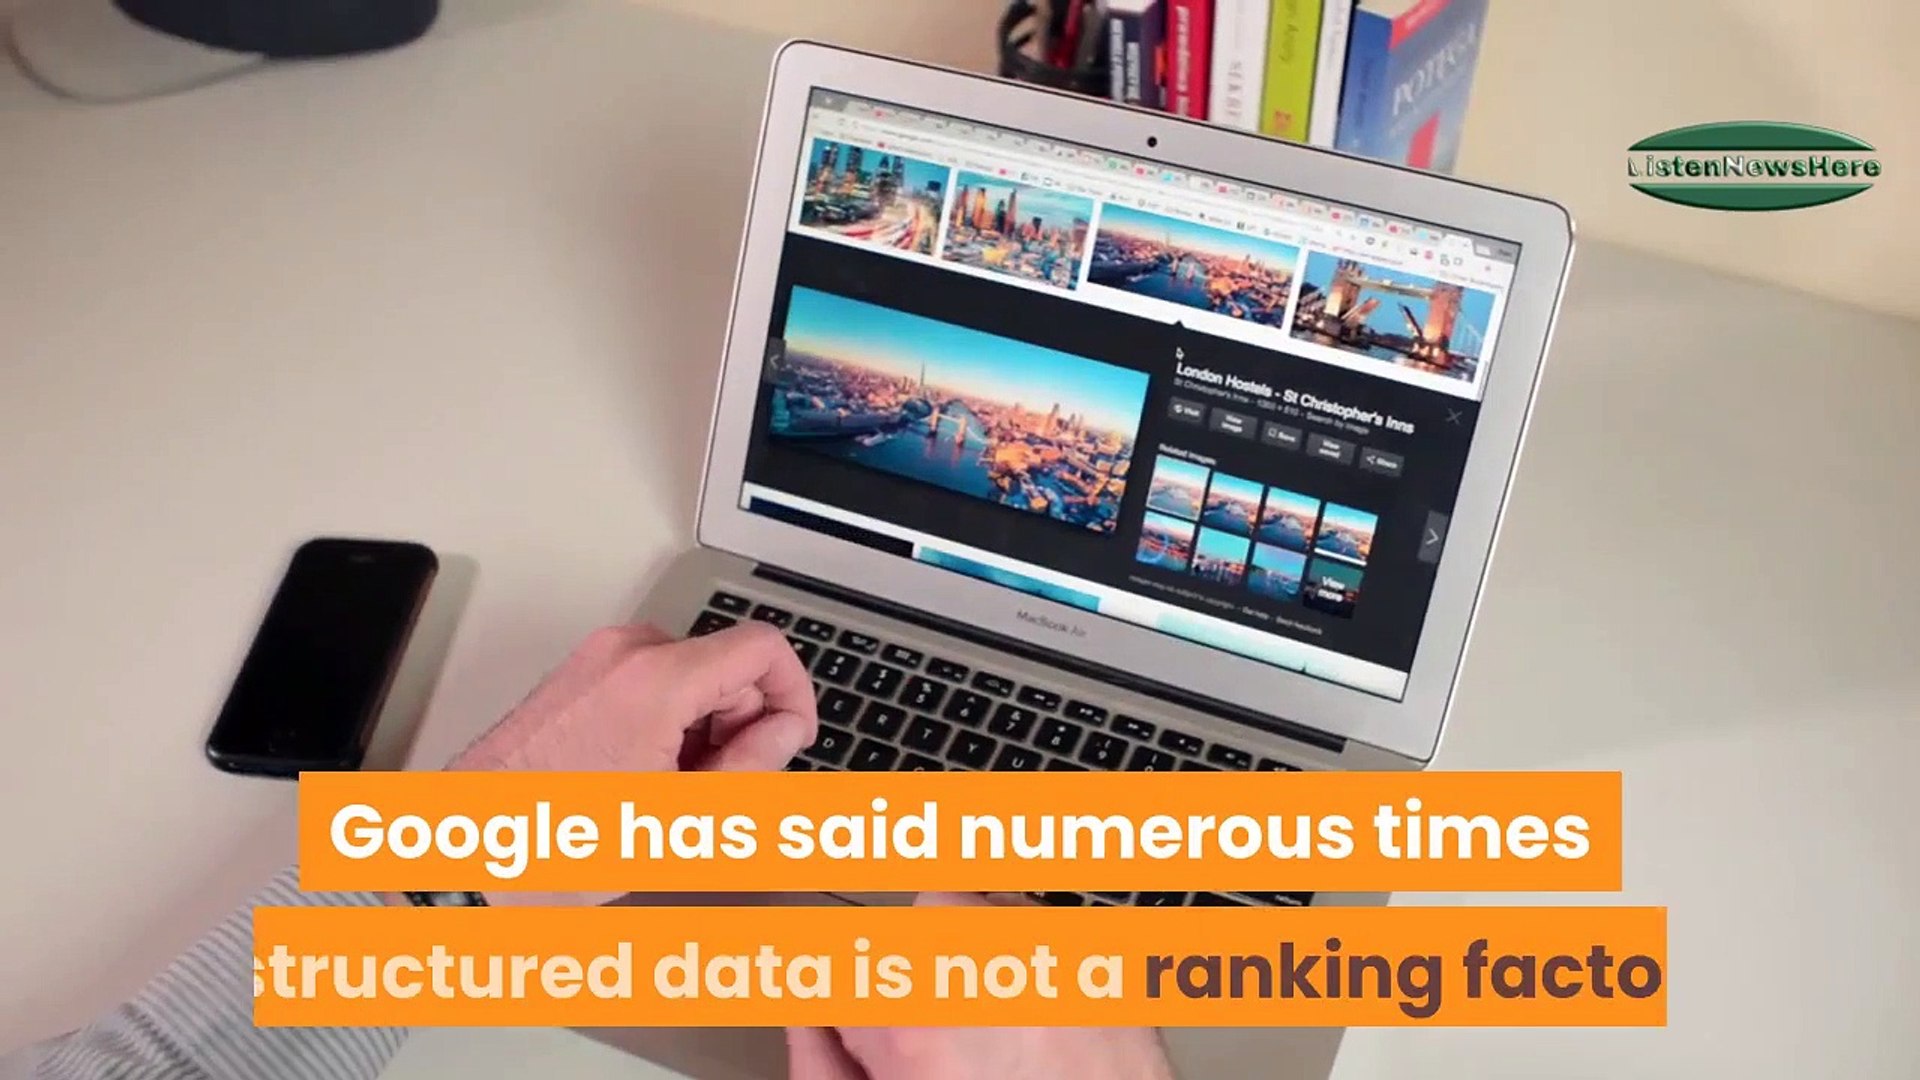 Google Once Again Says Structured Data Does Not Impact Ranking